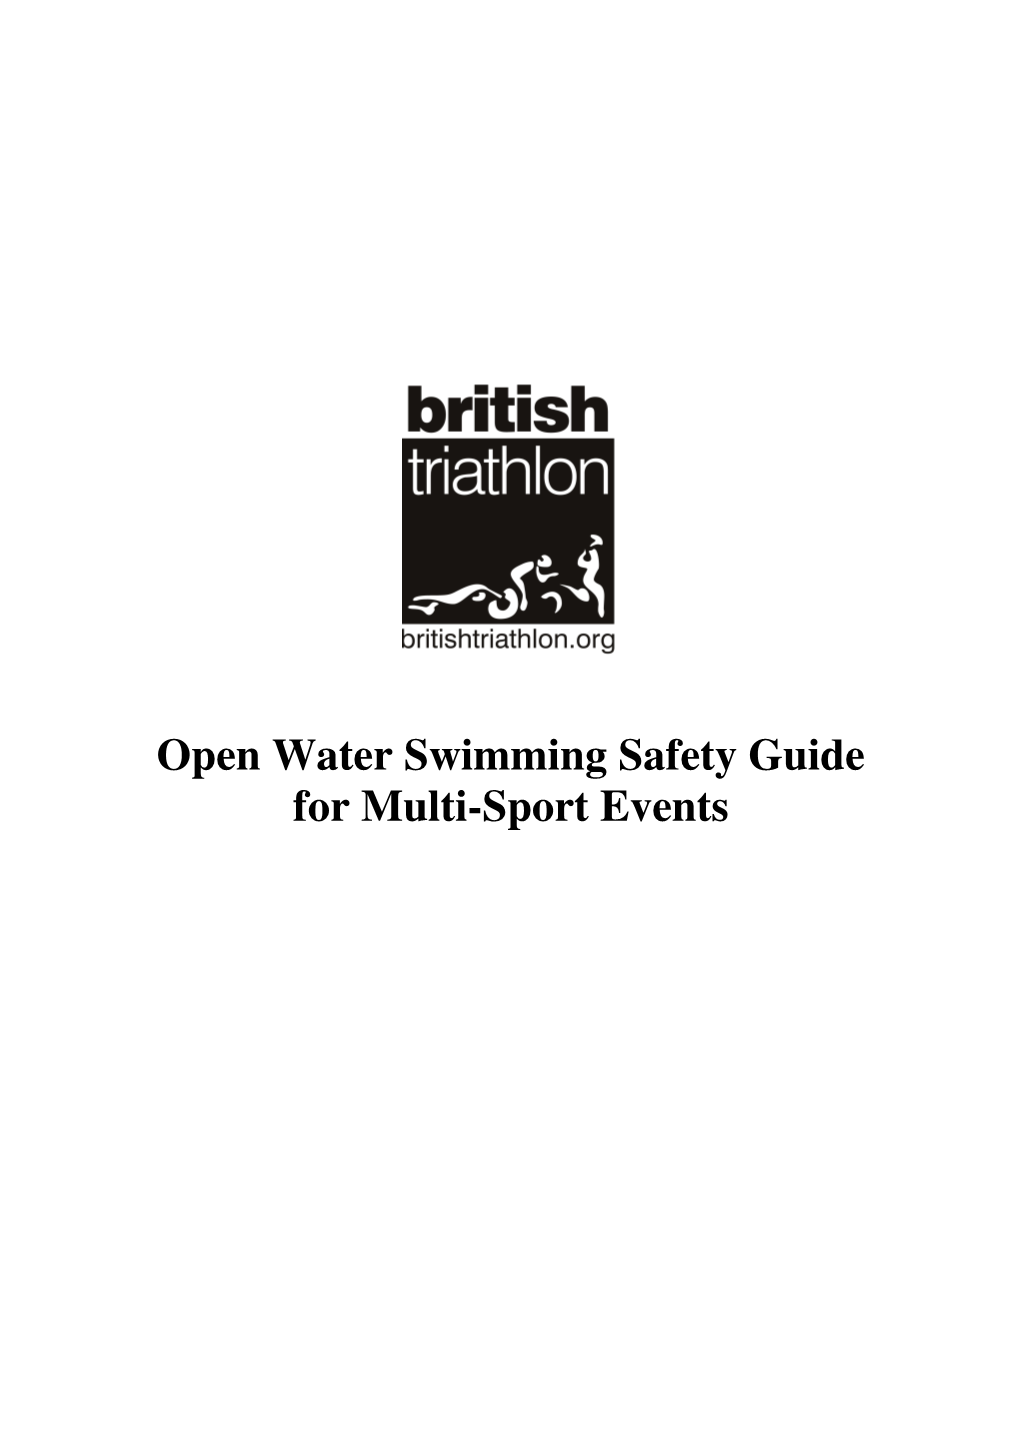 Open Water Swimming Safety Guide for Multi-Sport Events Contents